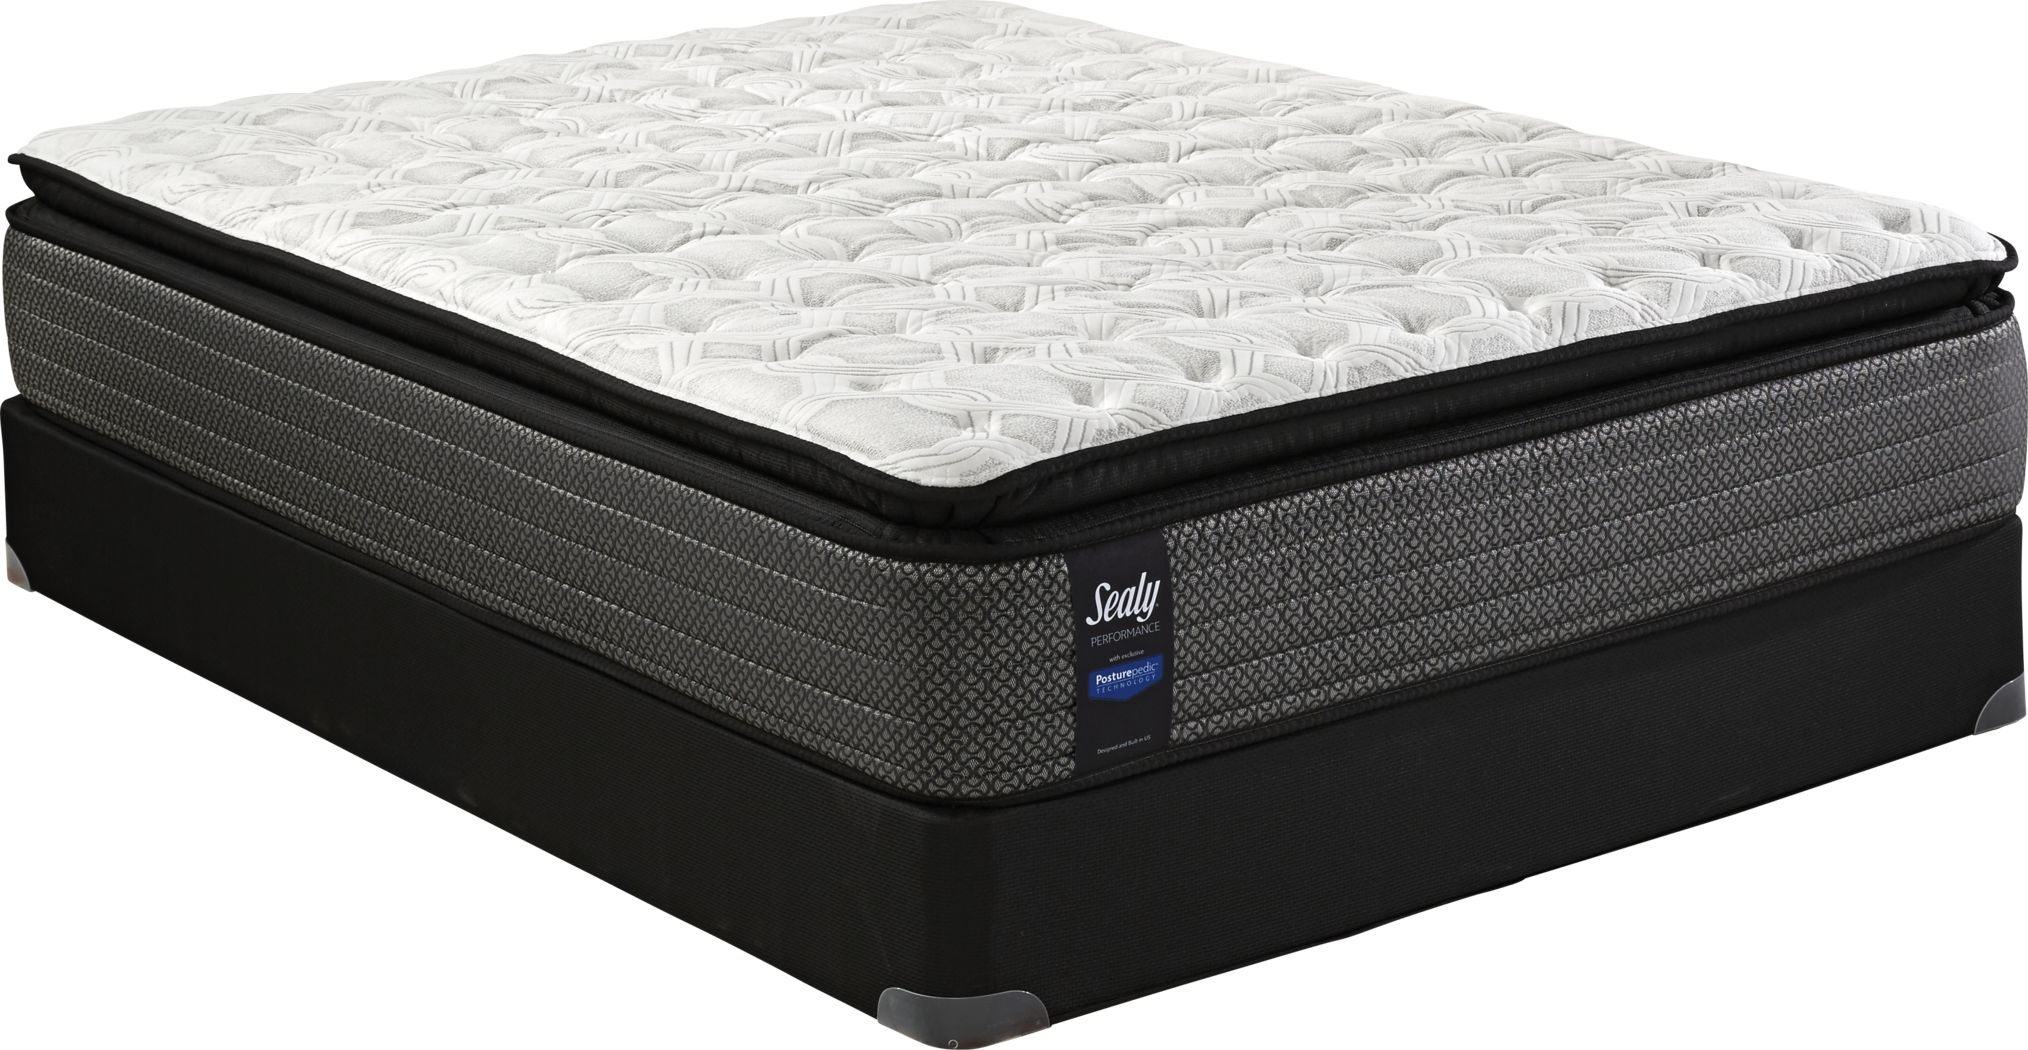 sealy performance paradise cove queen mattress set reviews